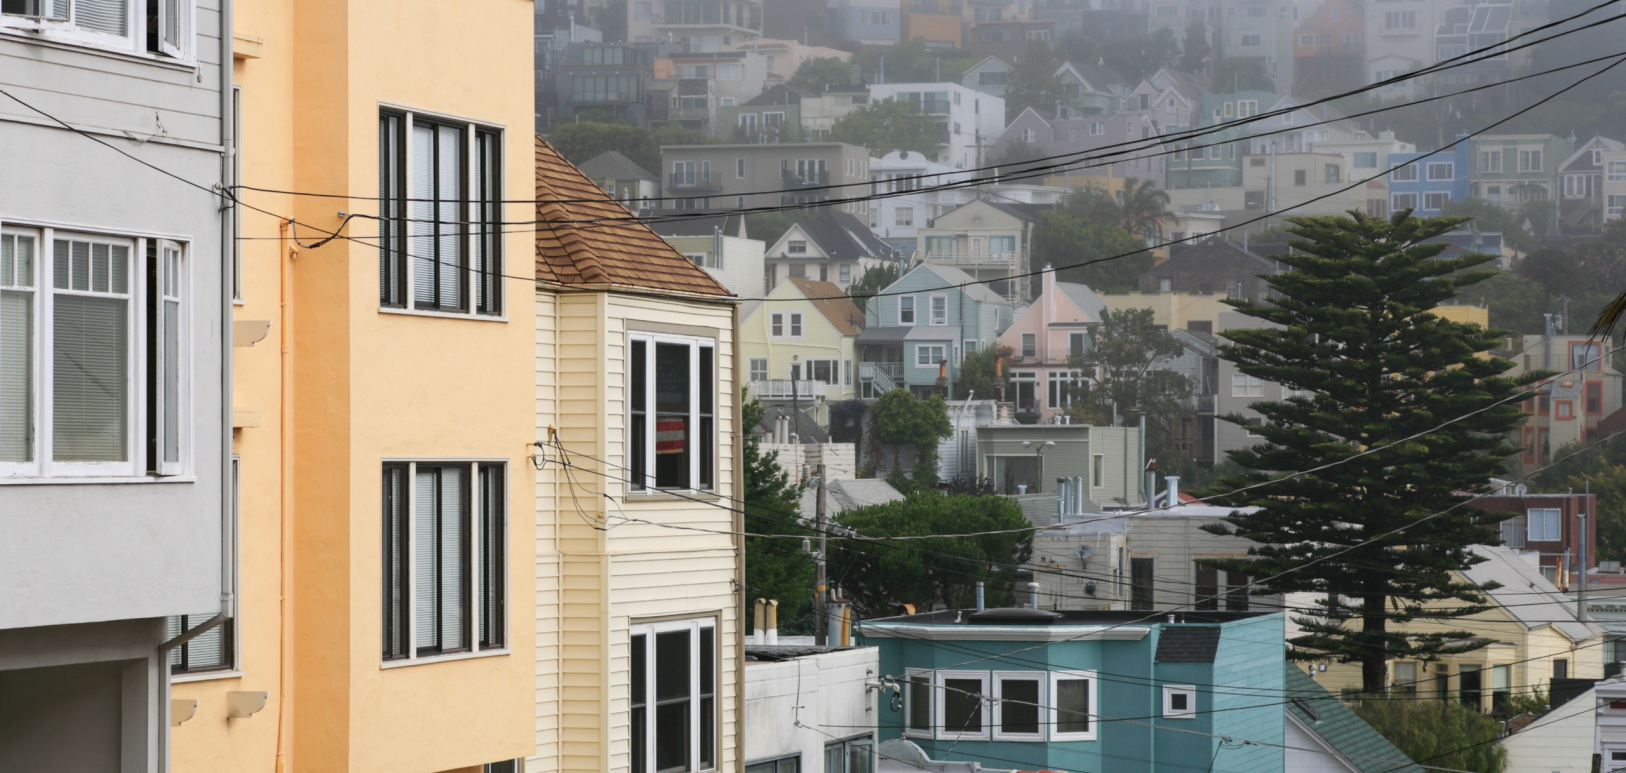 Photo of a residential neighborhood with multiple houses on a hillside. The houses are a mix of pastel and muted colors, with architectural styles typical of San Francisco. The foreground features utility wires and a variety of trees, including a large evergreen. The scene is slightly foggy, adding a misty, atmospheric quality to the image.